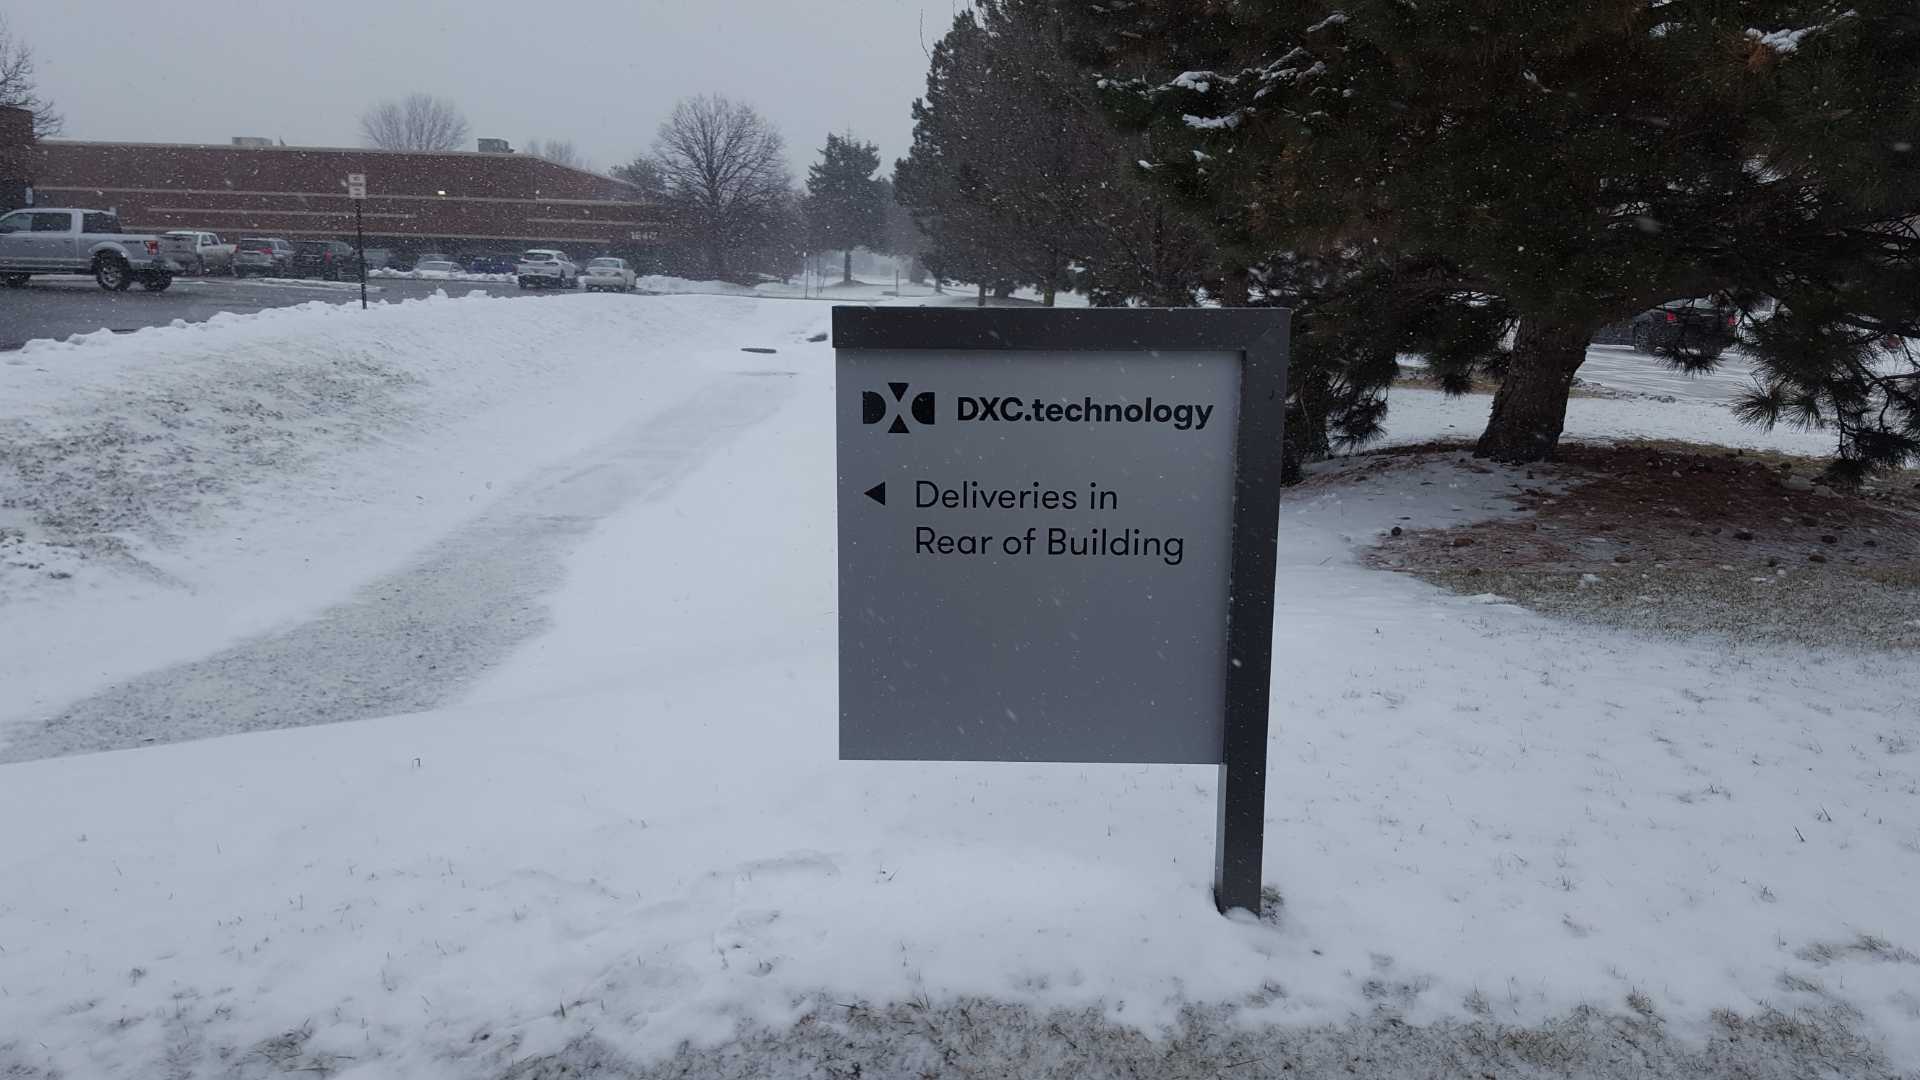 DXC WAYFINDING Directional sign "Deliveries in Rear of Building"